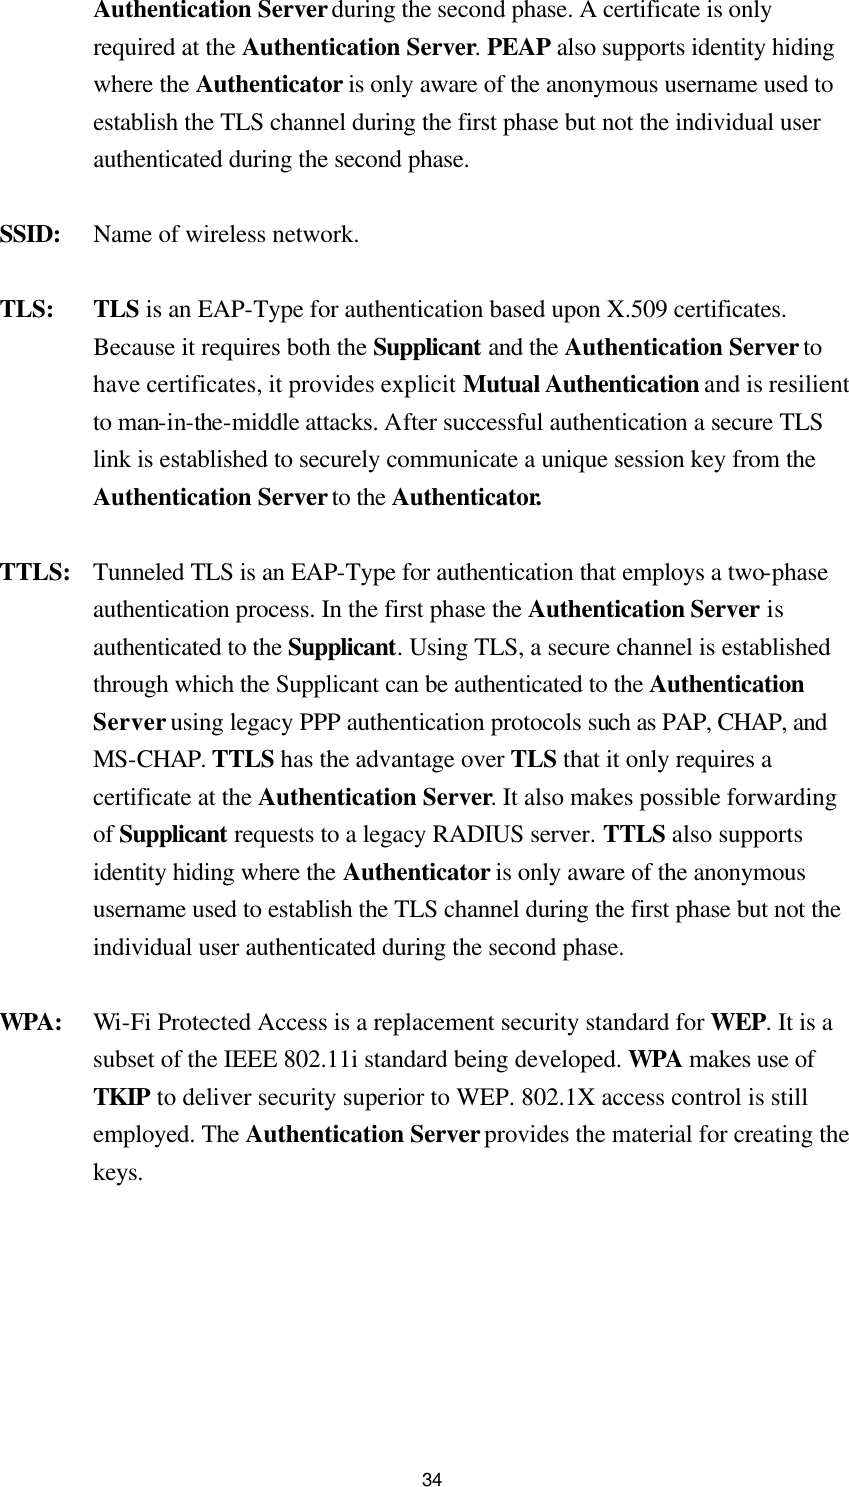  34Authentication Server during the second phase. A certificate is only required at the Authentication Server. PEAP also supports identity hiding where the Authenticator is only aware of the anonymous username used to establish the TLS channel during the first phase but not the individual user authenticated during the second phase. SSID: Name of wireless network. TLS: TLS is an EAP-Type for authentication based upon X.509 certificates. Because it requires both the Supplicant and the Authentication Server to have certificates, it provides explicit Mutual Authentication and is resilient to man-in-the-middle attacks. After successful authentication a secure TLS link is established to securely communicate a unique session key from the Authentication Server to the Authenticator. TTLS:   Tunneled TLS is an EAP-Type for authentication that employs a two-phase authentication process. In the first phase the Authentication Server is authenticated to the Supplicant. Using TLS, a secure channel is established through which the Supplicant can be authenticated to the Authentication Server using legacy PPP authentication protocols such as PAP, CHAP, and MS-CHAP. TTLS has the advantage over TLS that it only requires a certificate at the Authentication Server. It also makes possible forwarding of Supplicant requests to a legacy RADIUS server. TTLS also supports identity hiding where the Authenticator is only aware of the anonymous username used to establish the TLS channel during the first phase but not the individual user authenticated during the second phase. WPA: Wi-Fi Protected Access is a replacement security standard for WEP. It is a subset of the IEEE 802.11i standard being developed. WPA makes use of TKIP to deliver security superior to WEP. 802.1X access control is still employed. The Authentication Server provides the material for creating the keys.  